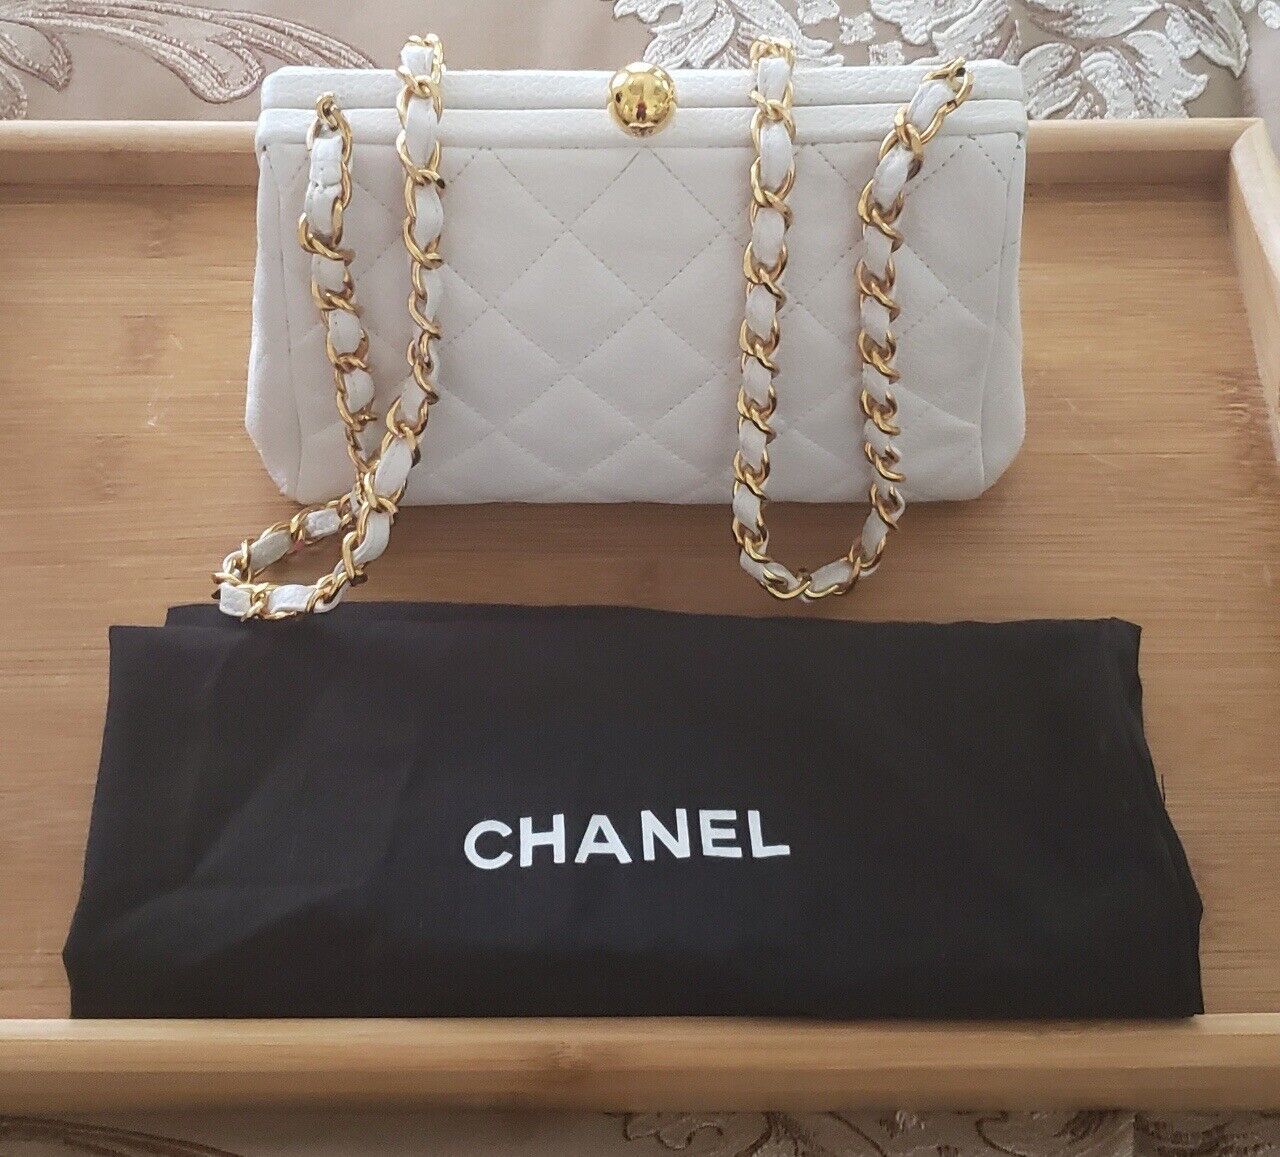 Authentic Chanel Vintage Frame Bag White Caviar With Gold ~ RARE